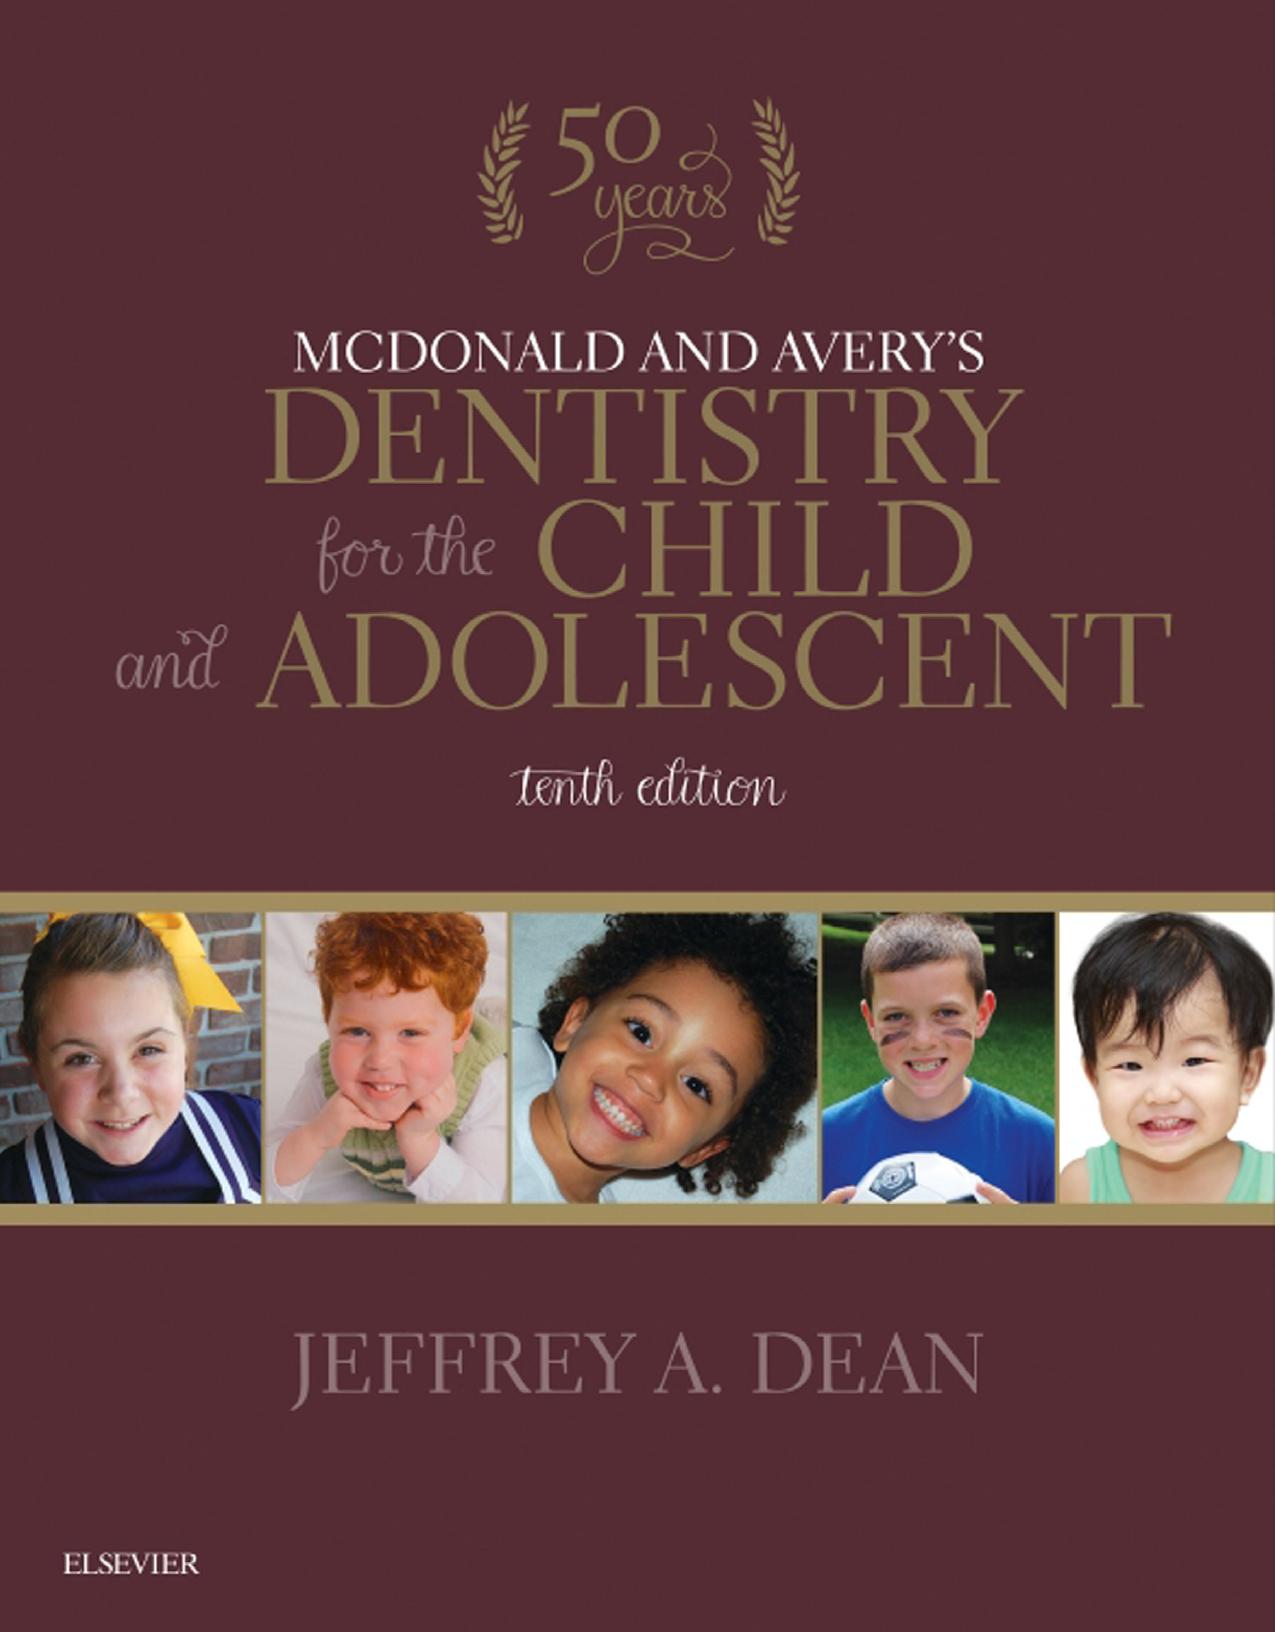 McDonald and Avery's Dentistry for the Child and Adolescent, 10th Edition.jpg